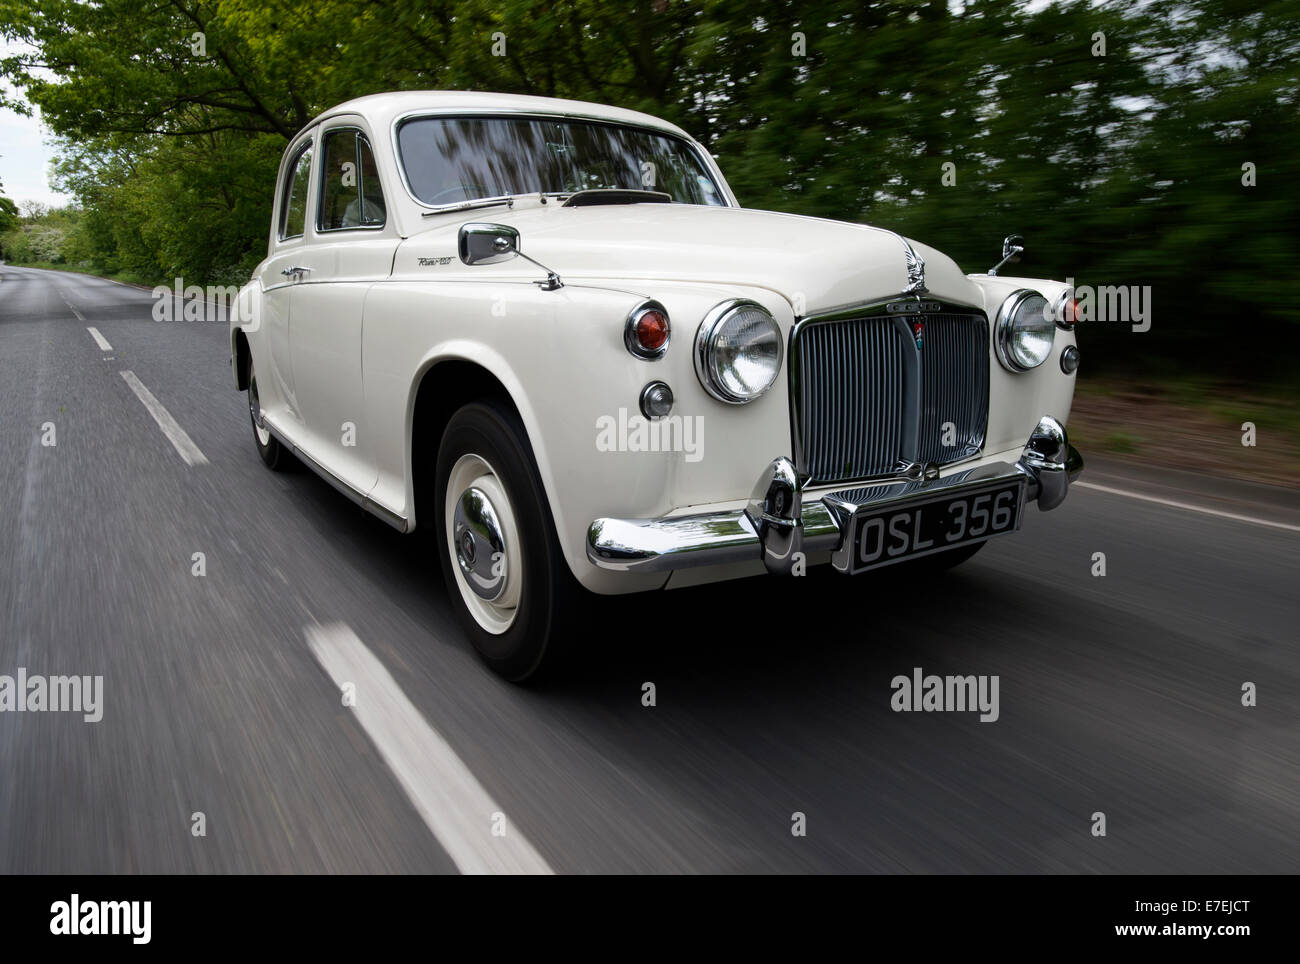 Rover 100 P4 classic British car 'Aunty Rover' driving Stock Photo